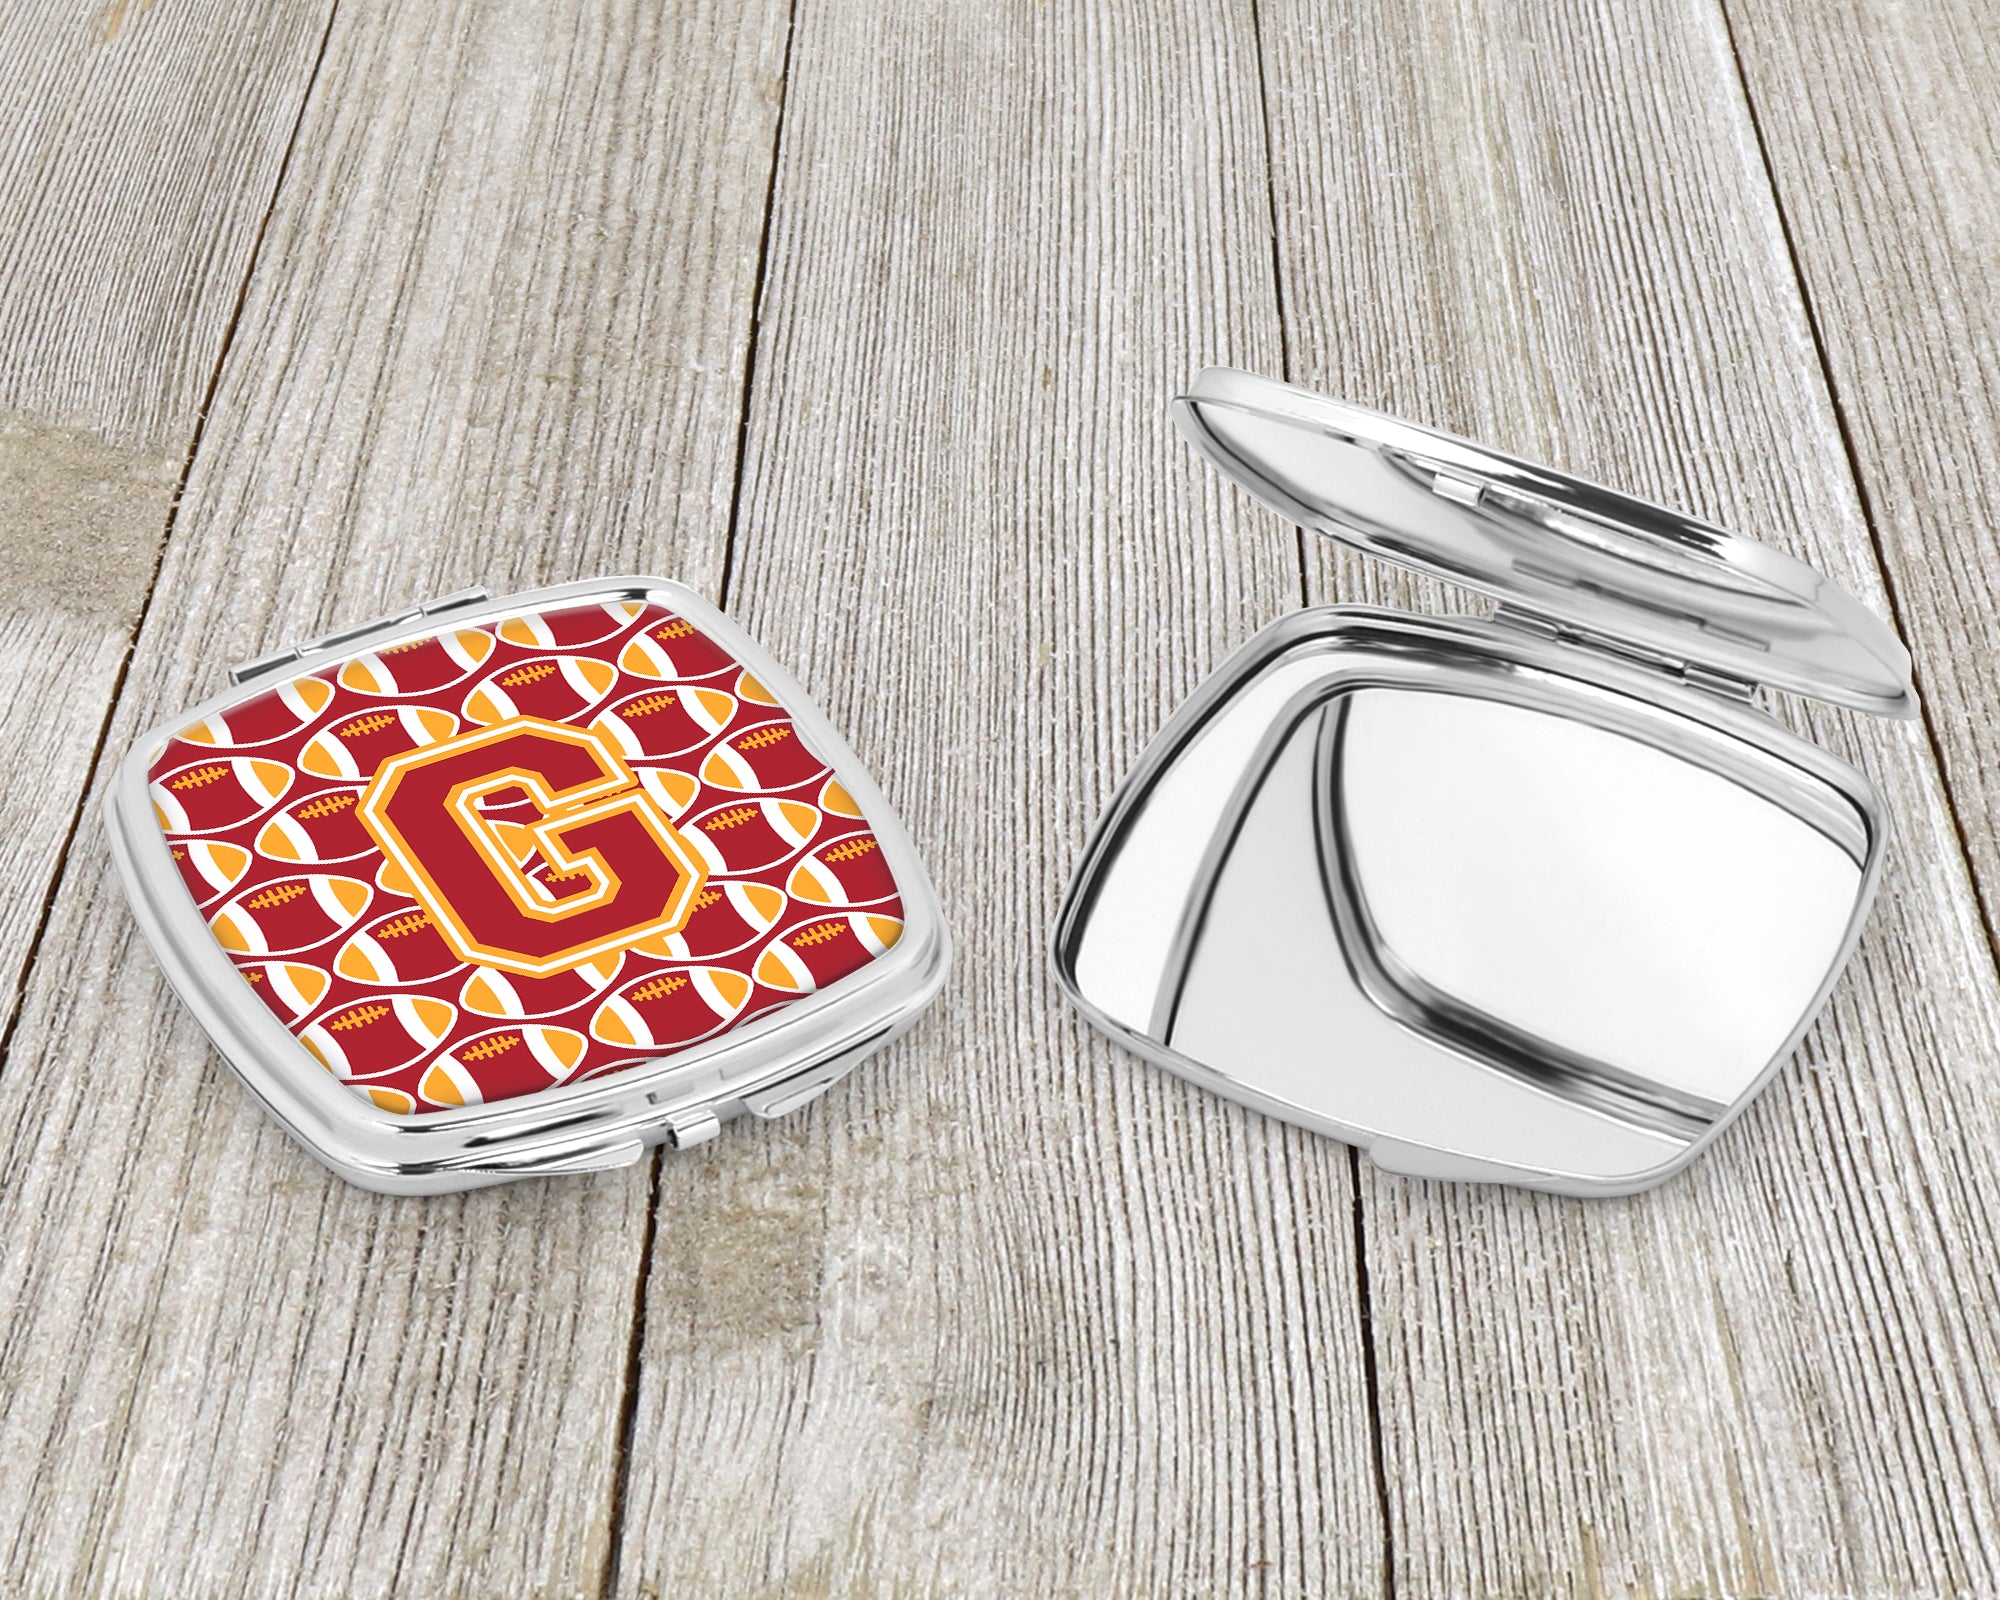 Letter G Football Cardinal and Gold Compact Mirror CJ1070-GSCM  the-store.com.